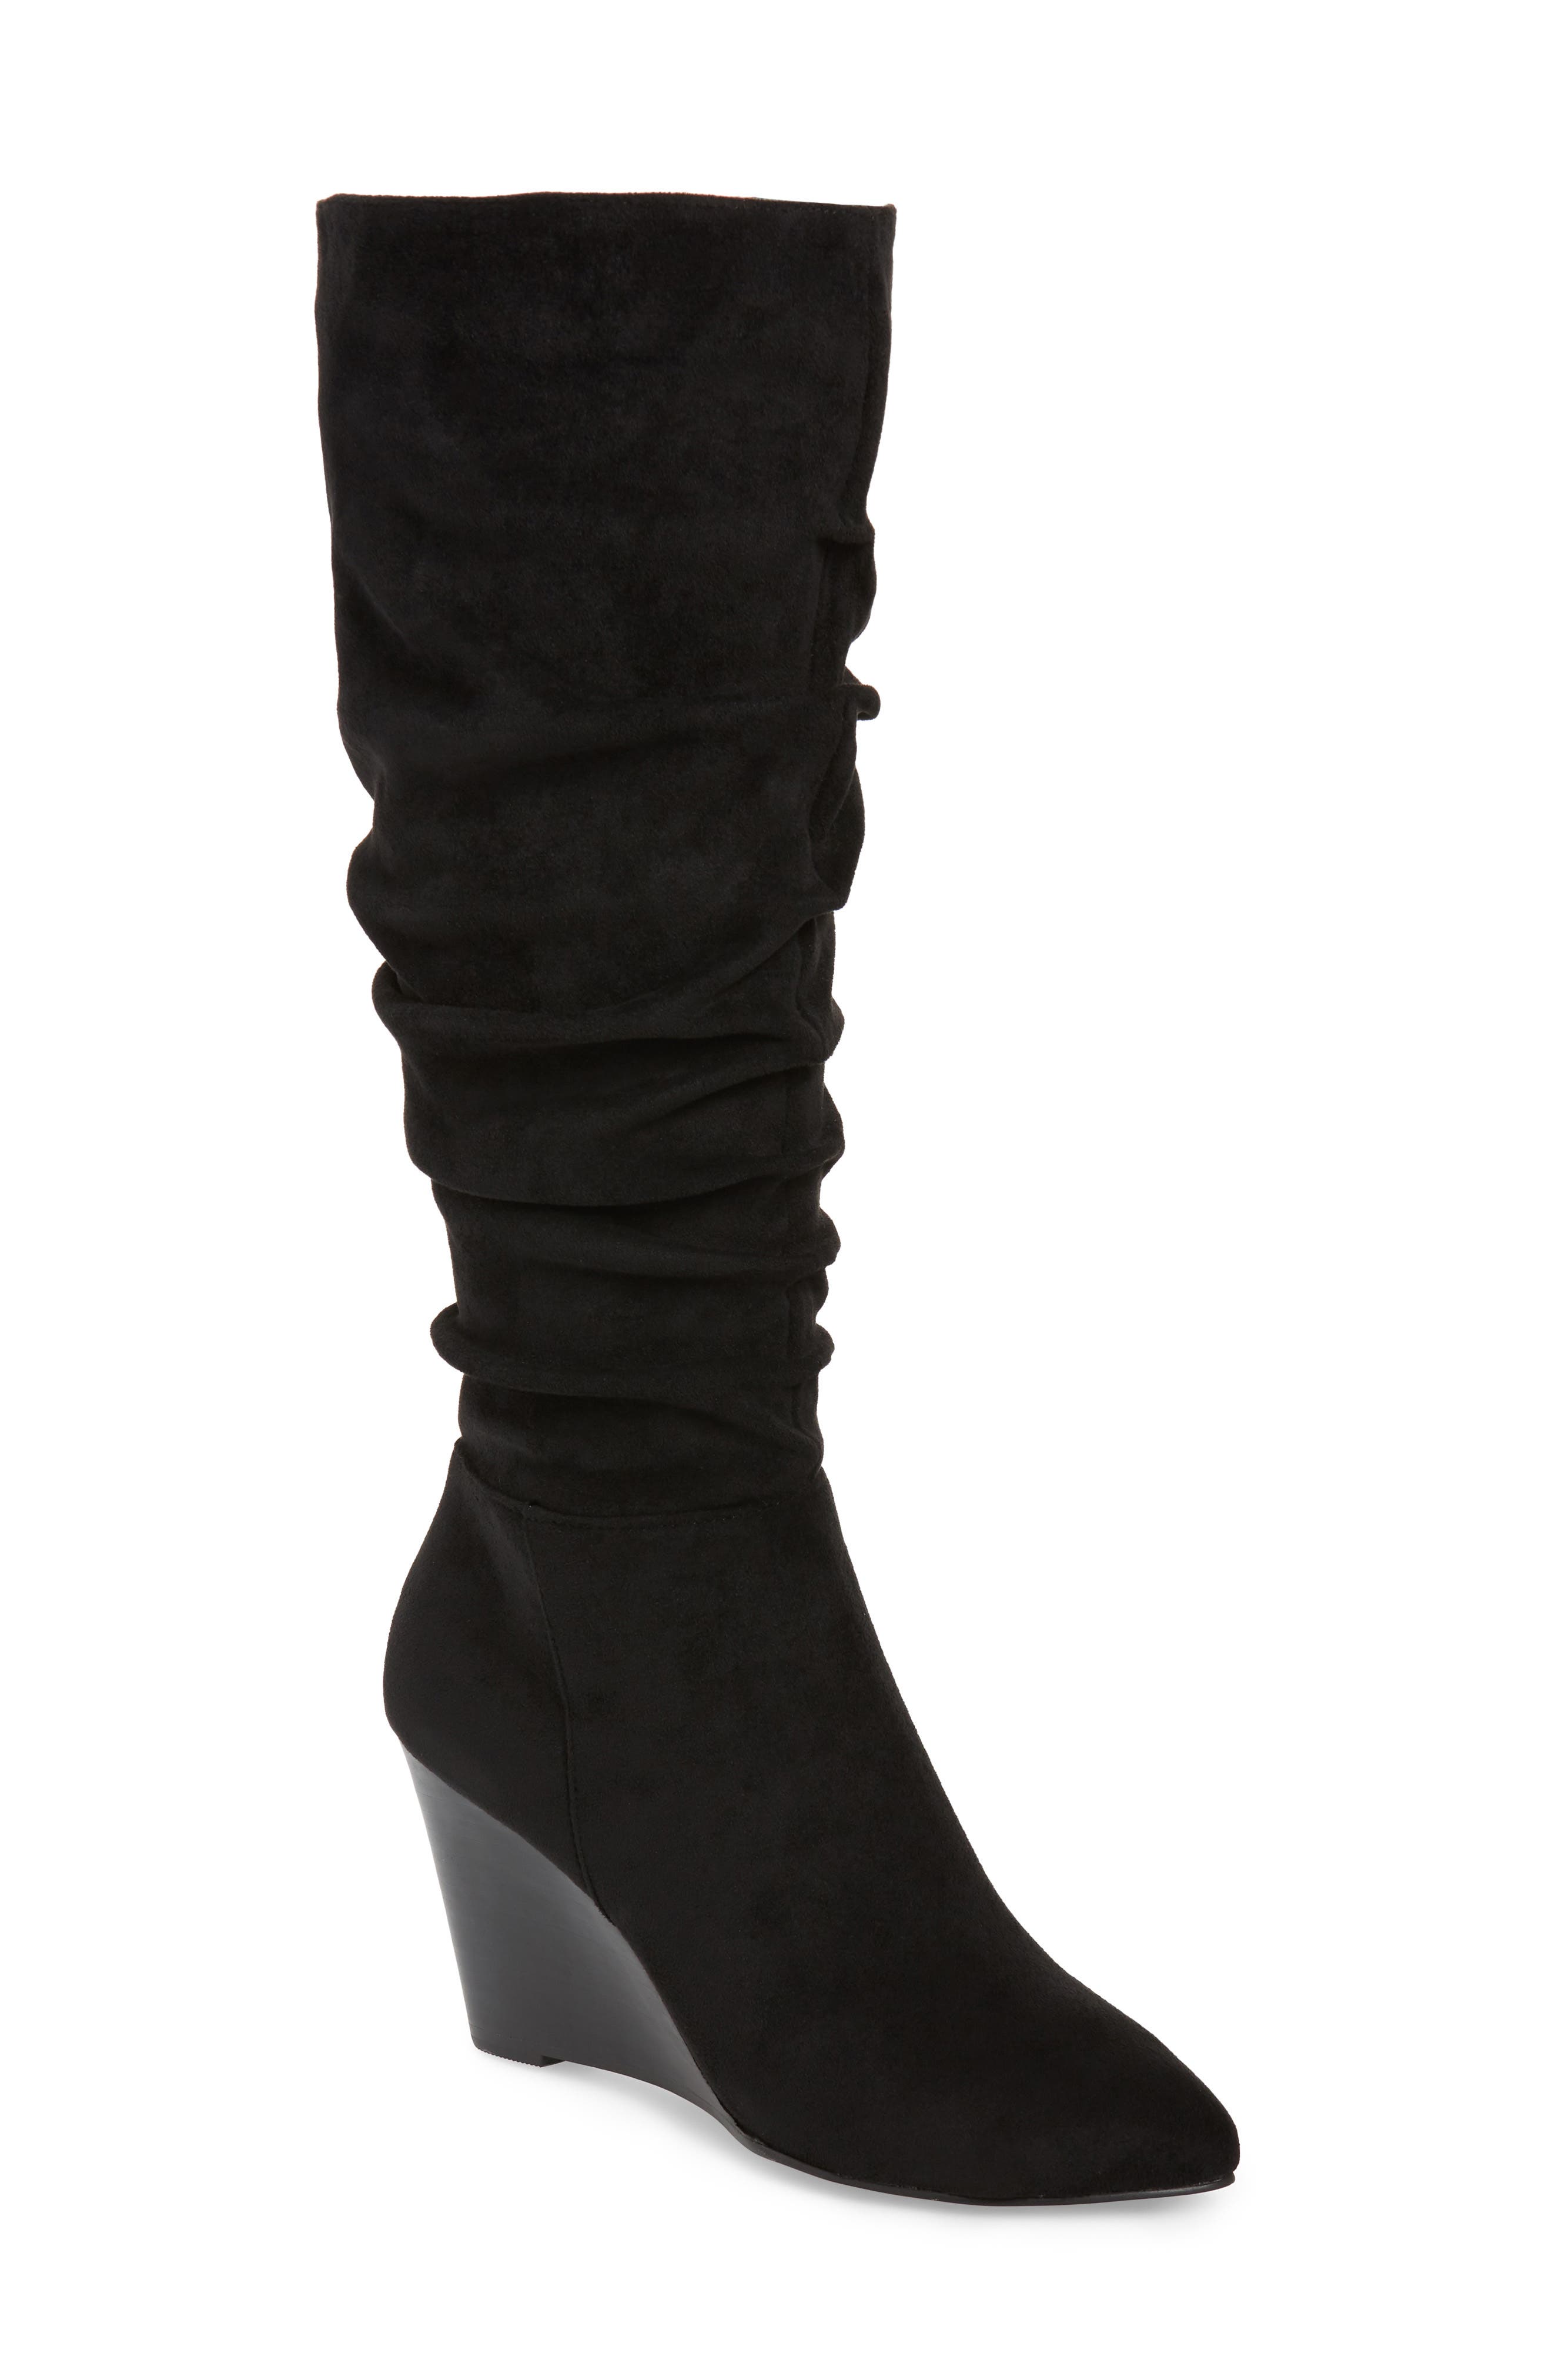 nordstrom slouchy boots